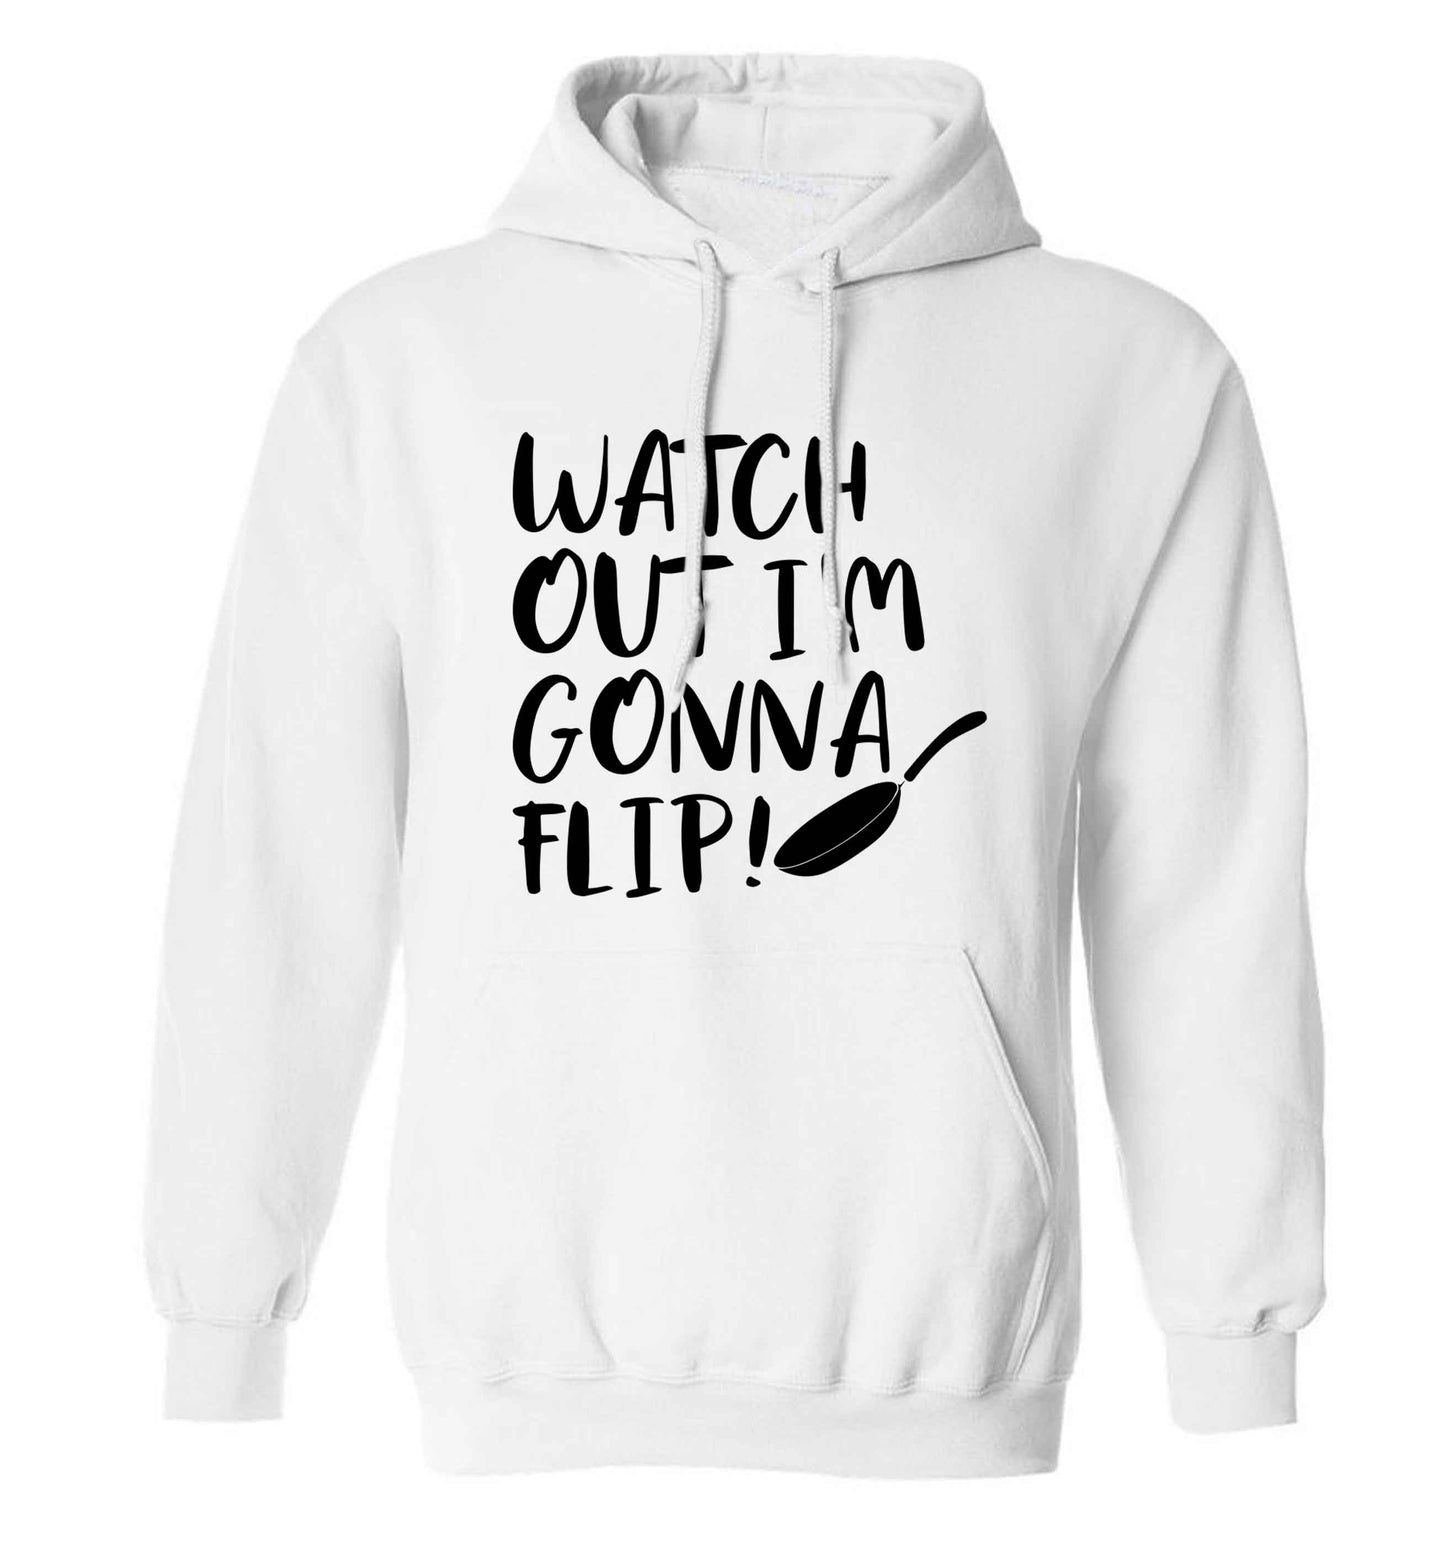 Watch out I'm gonna flip! adults unisex white hoodie 2XL